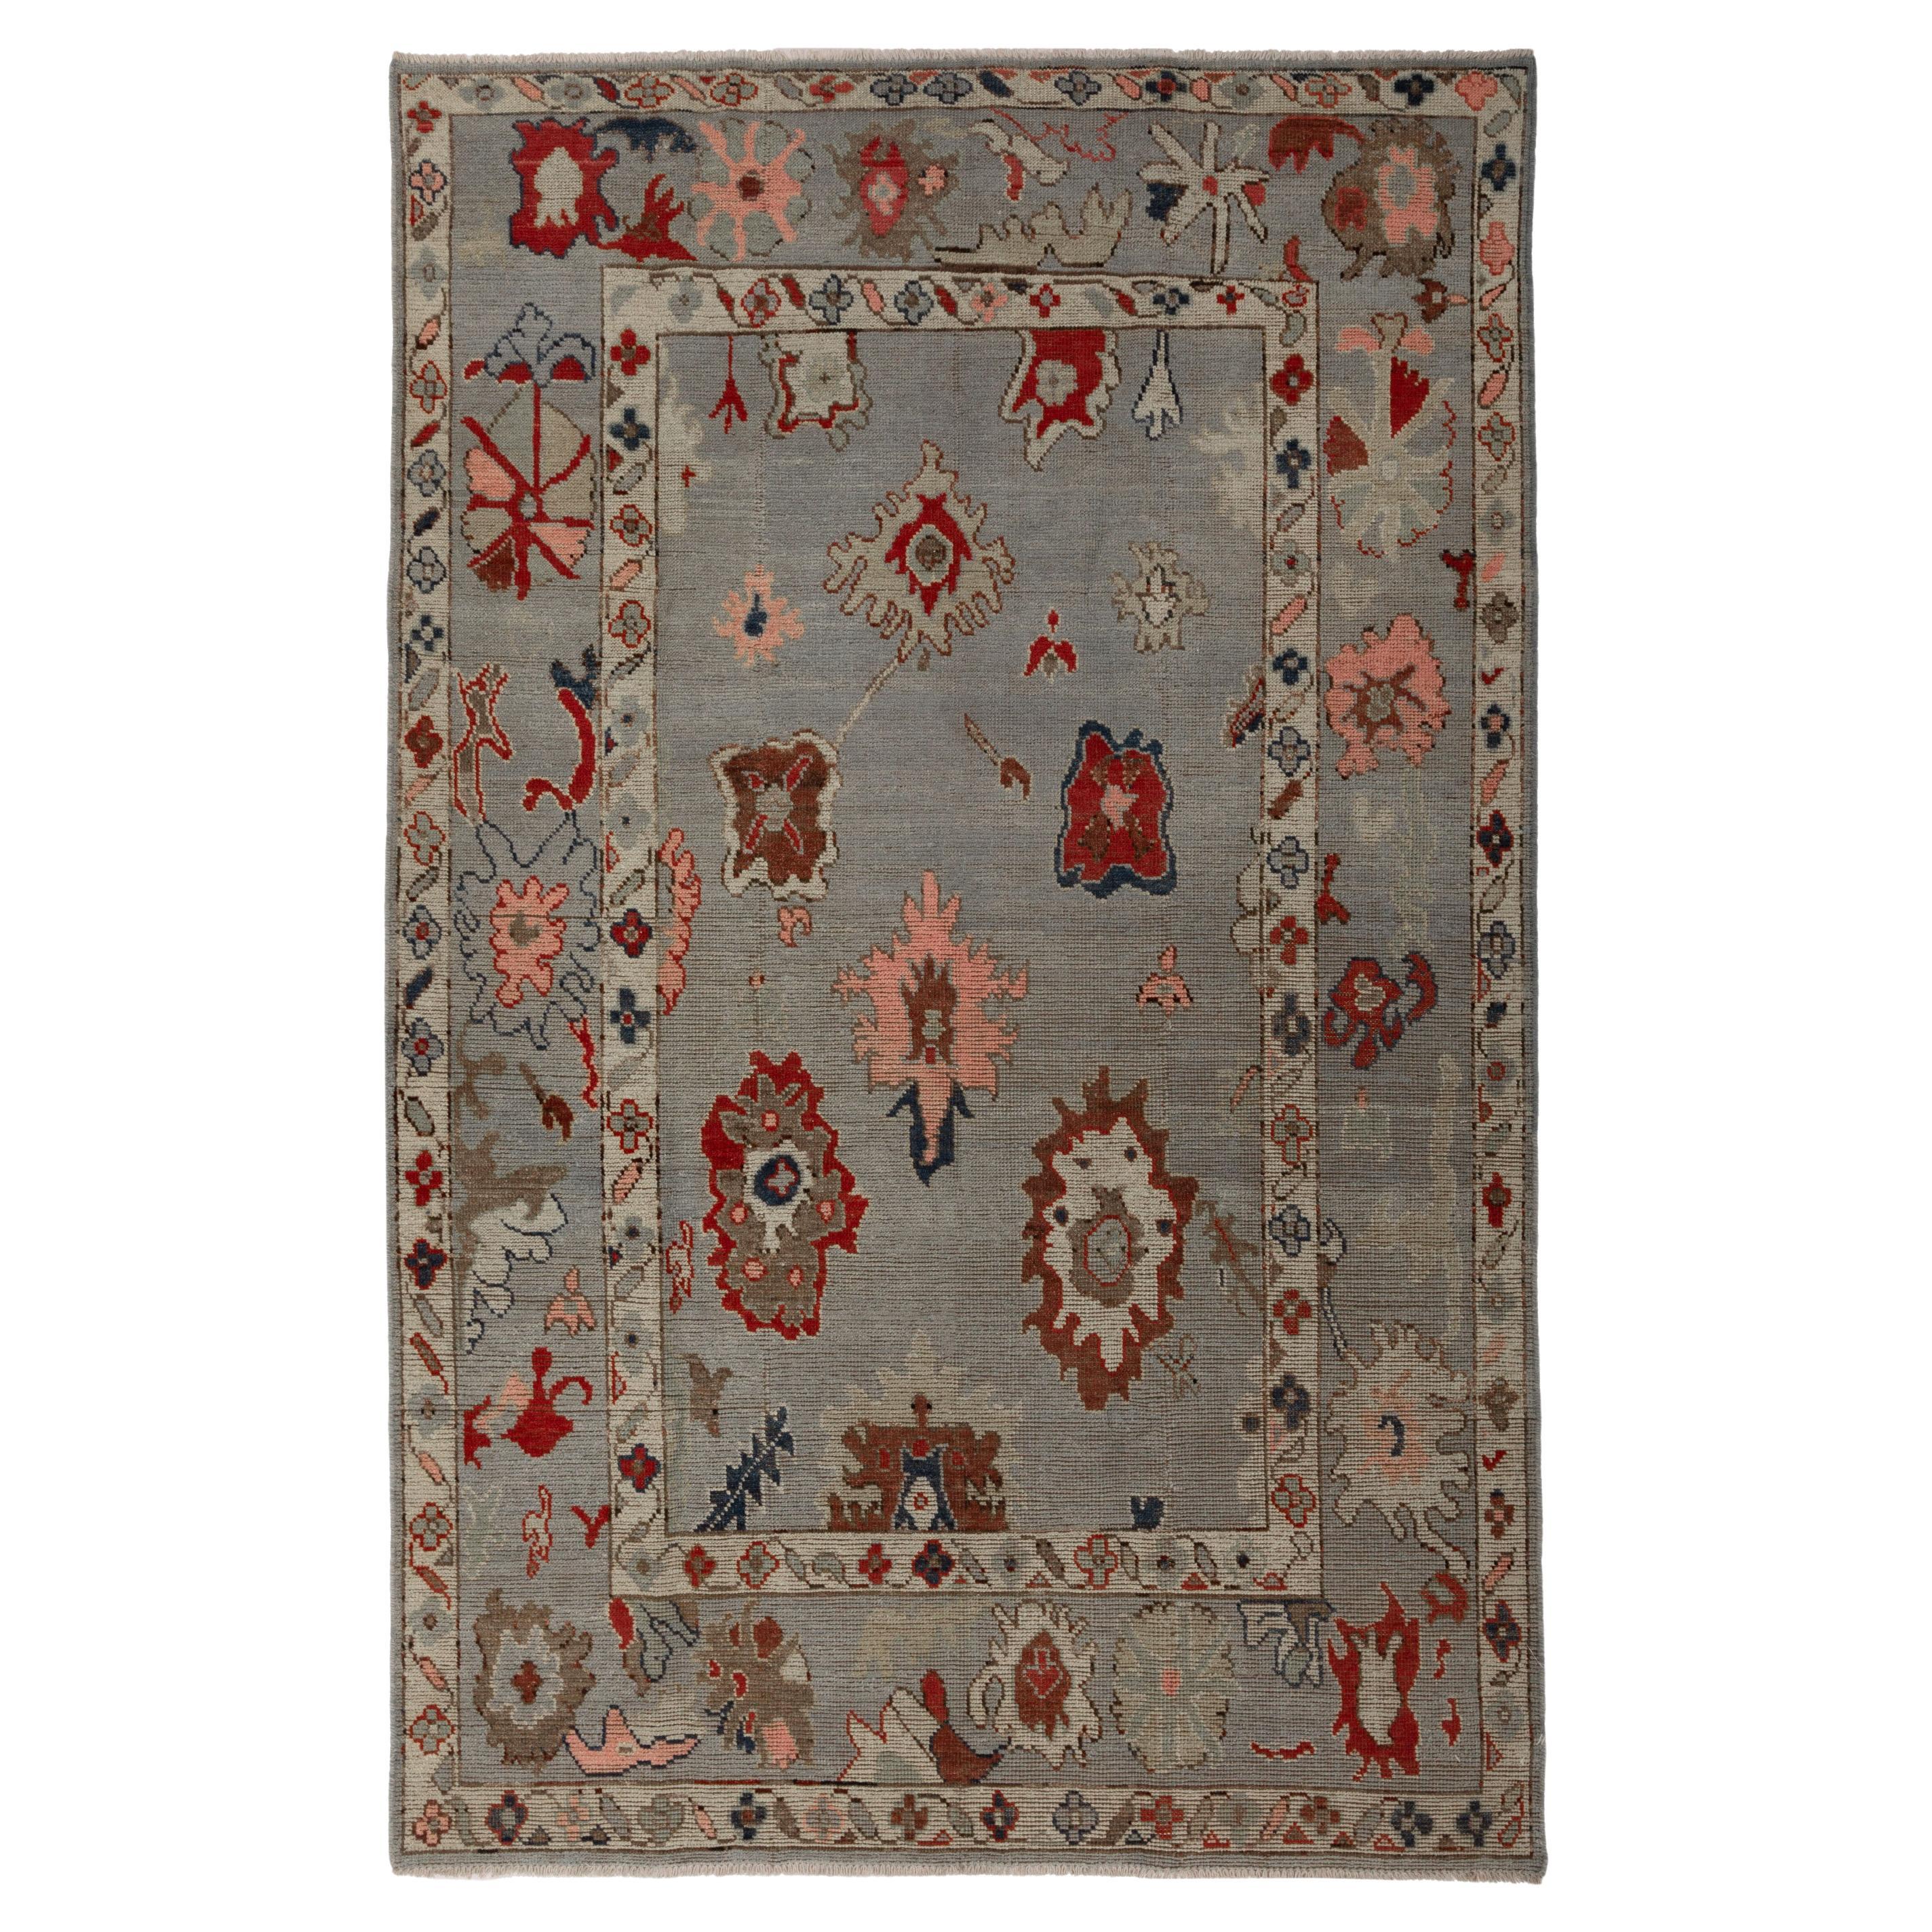 abc carpet Zameen Multicolored Floral Wool Rug - 5'4" x 8'1"